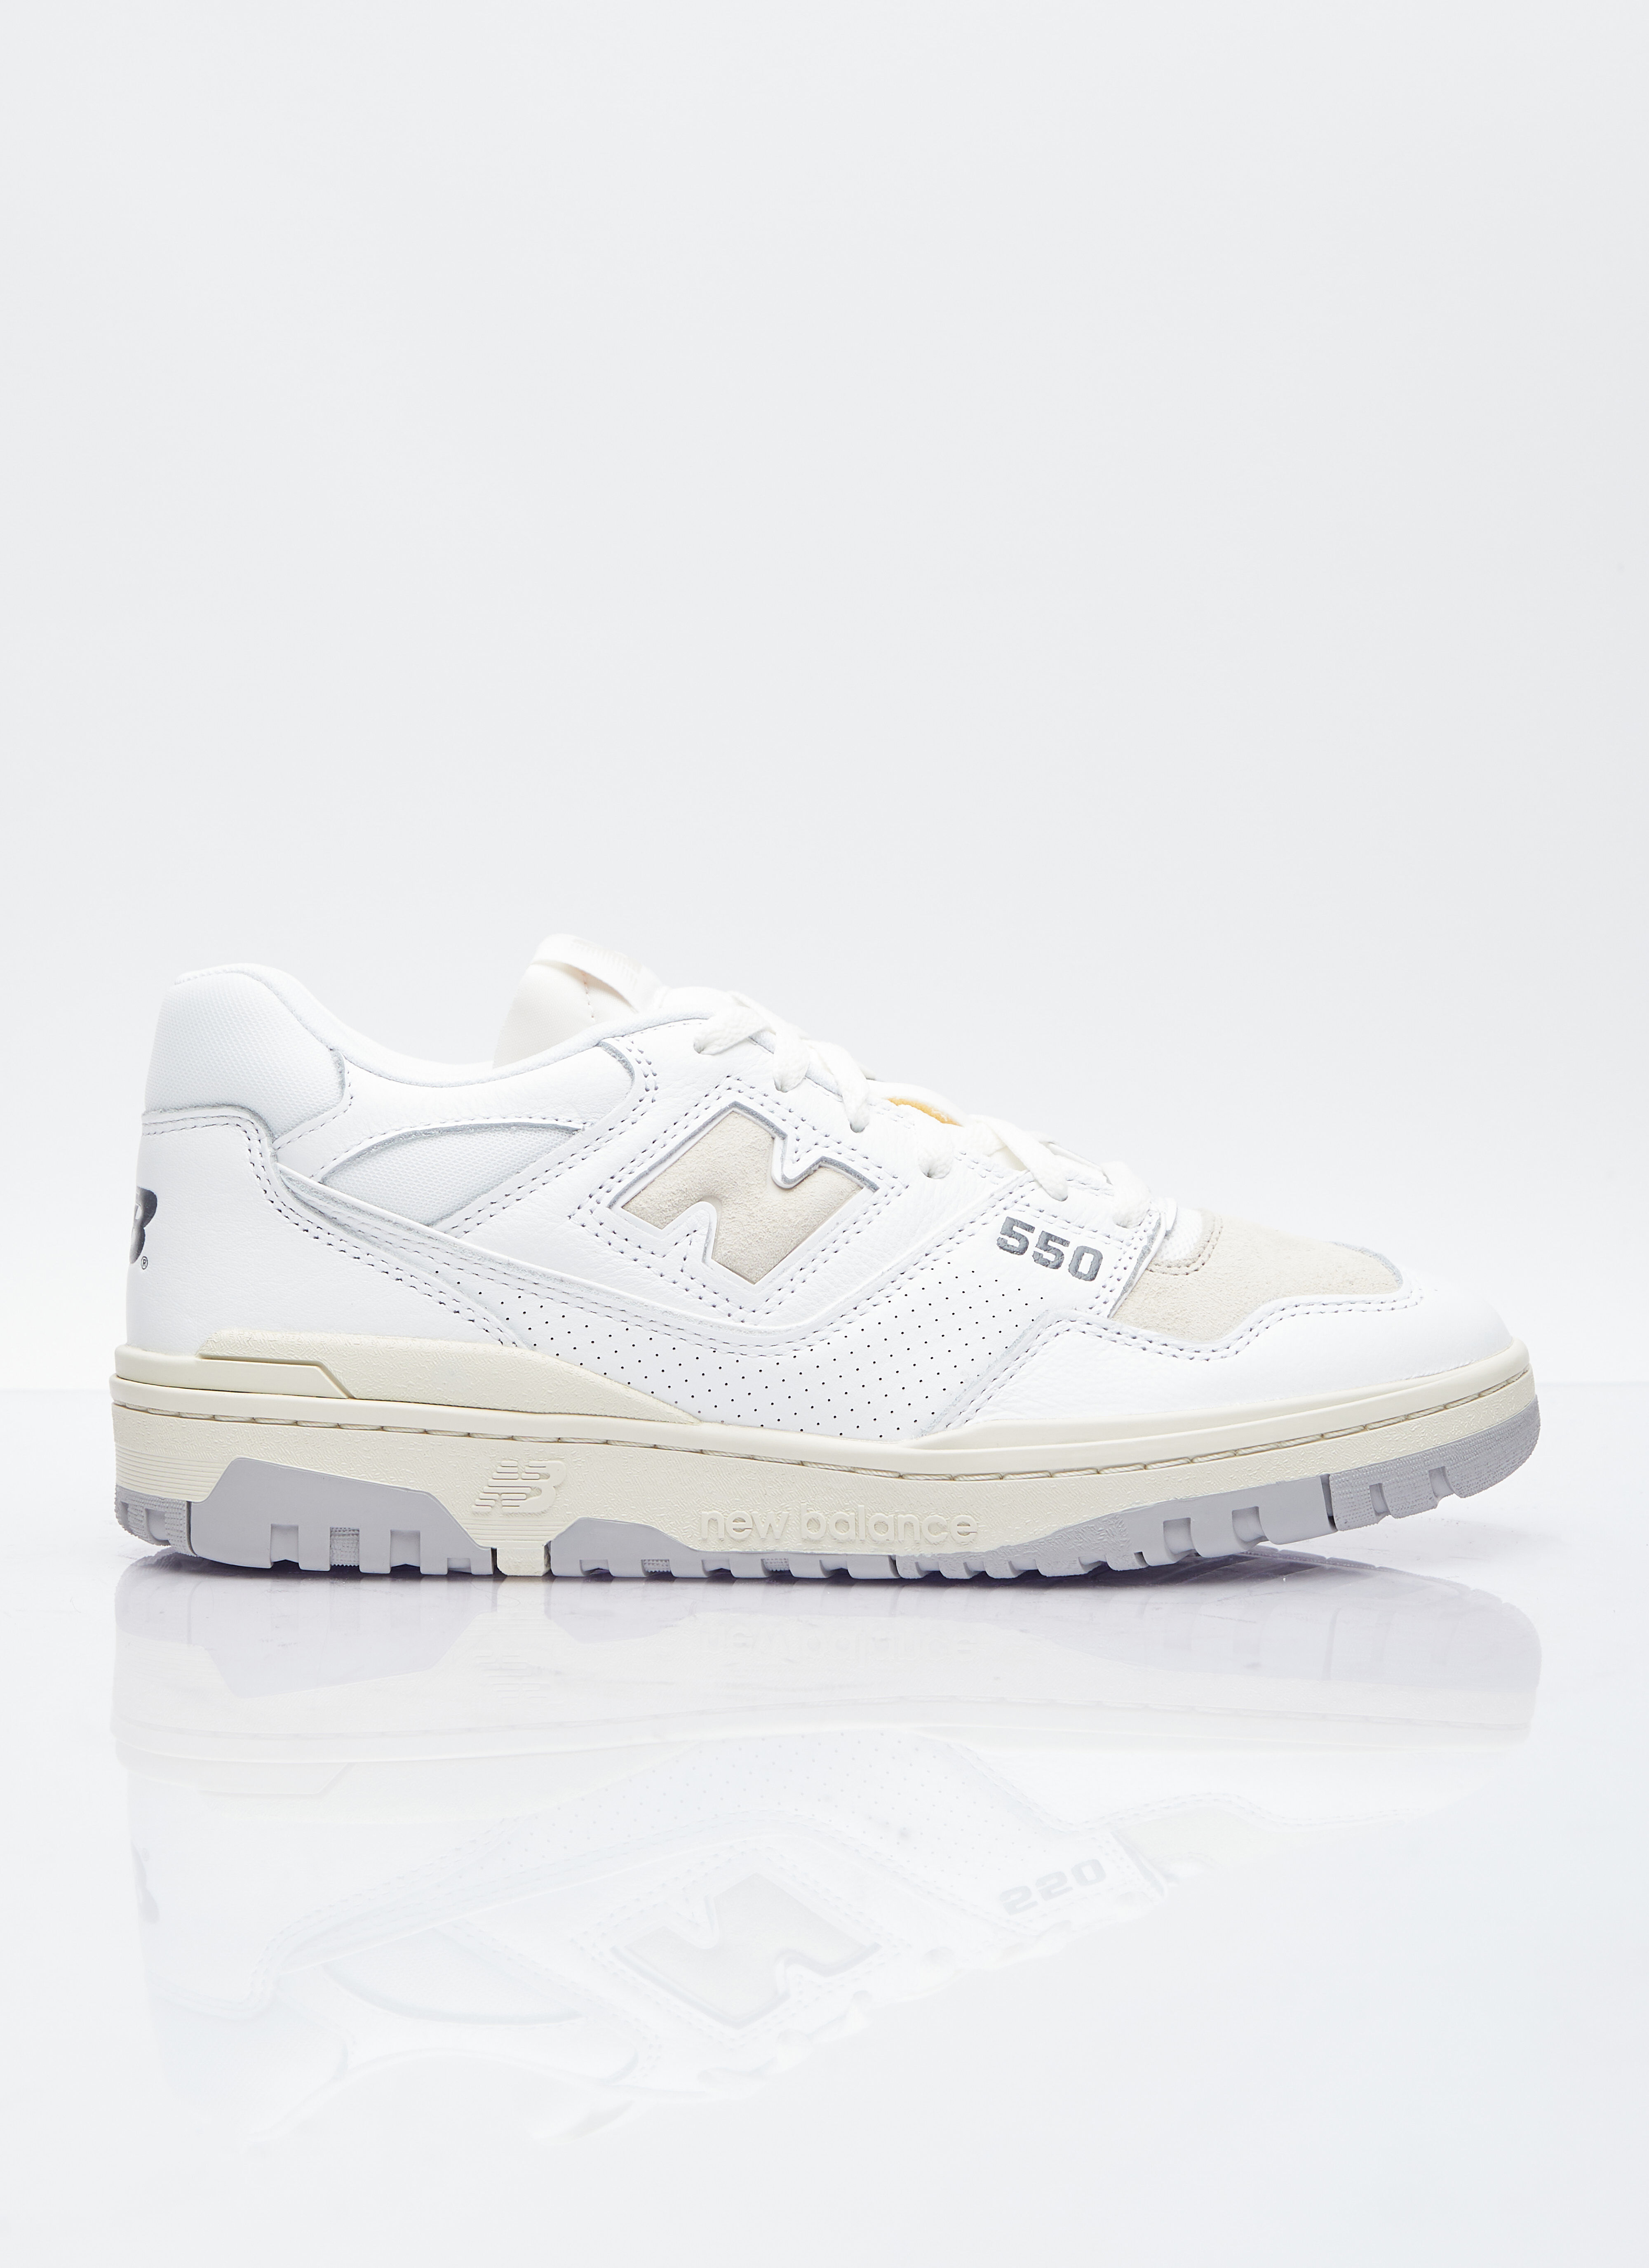 New Balance 550 Sneakers White new0354006